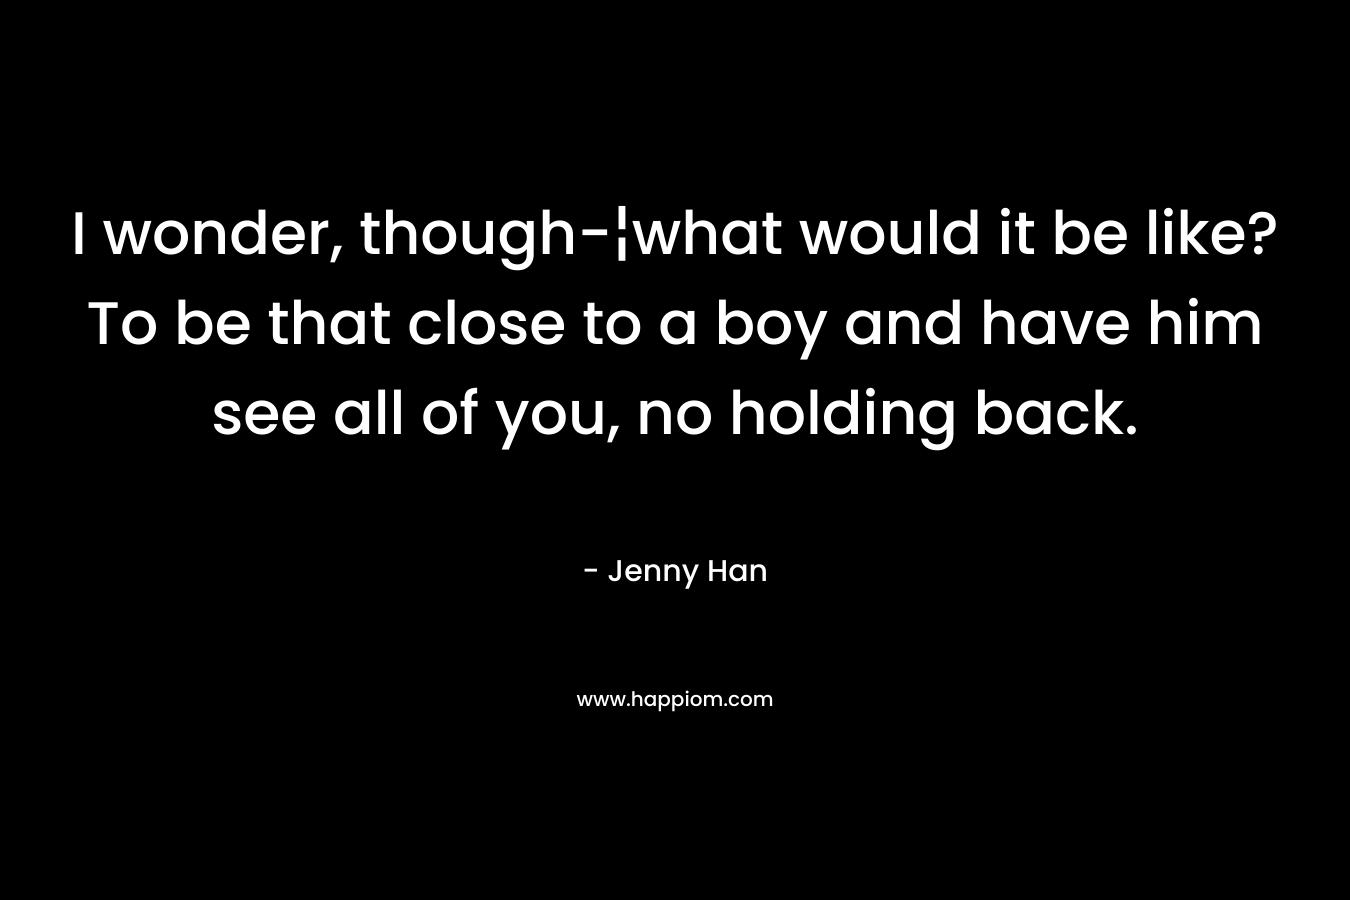 I wonder, though-¦what would it be like? To be that close to a boy and have him see all of you, no holding back. – Jenny Han